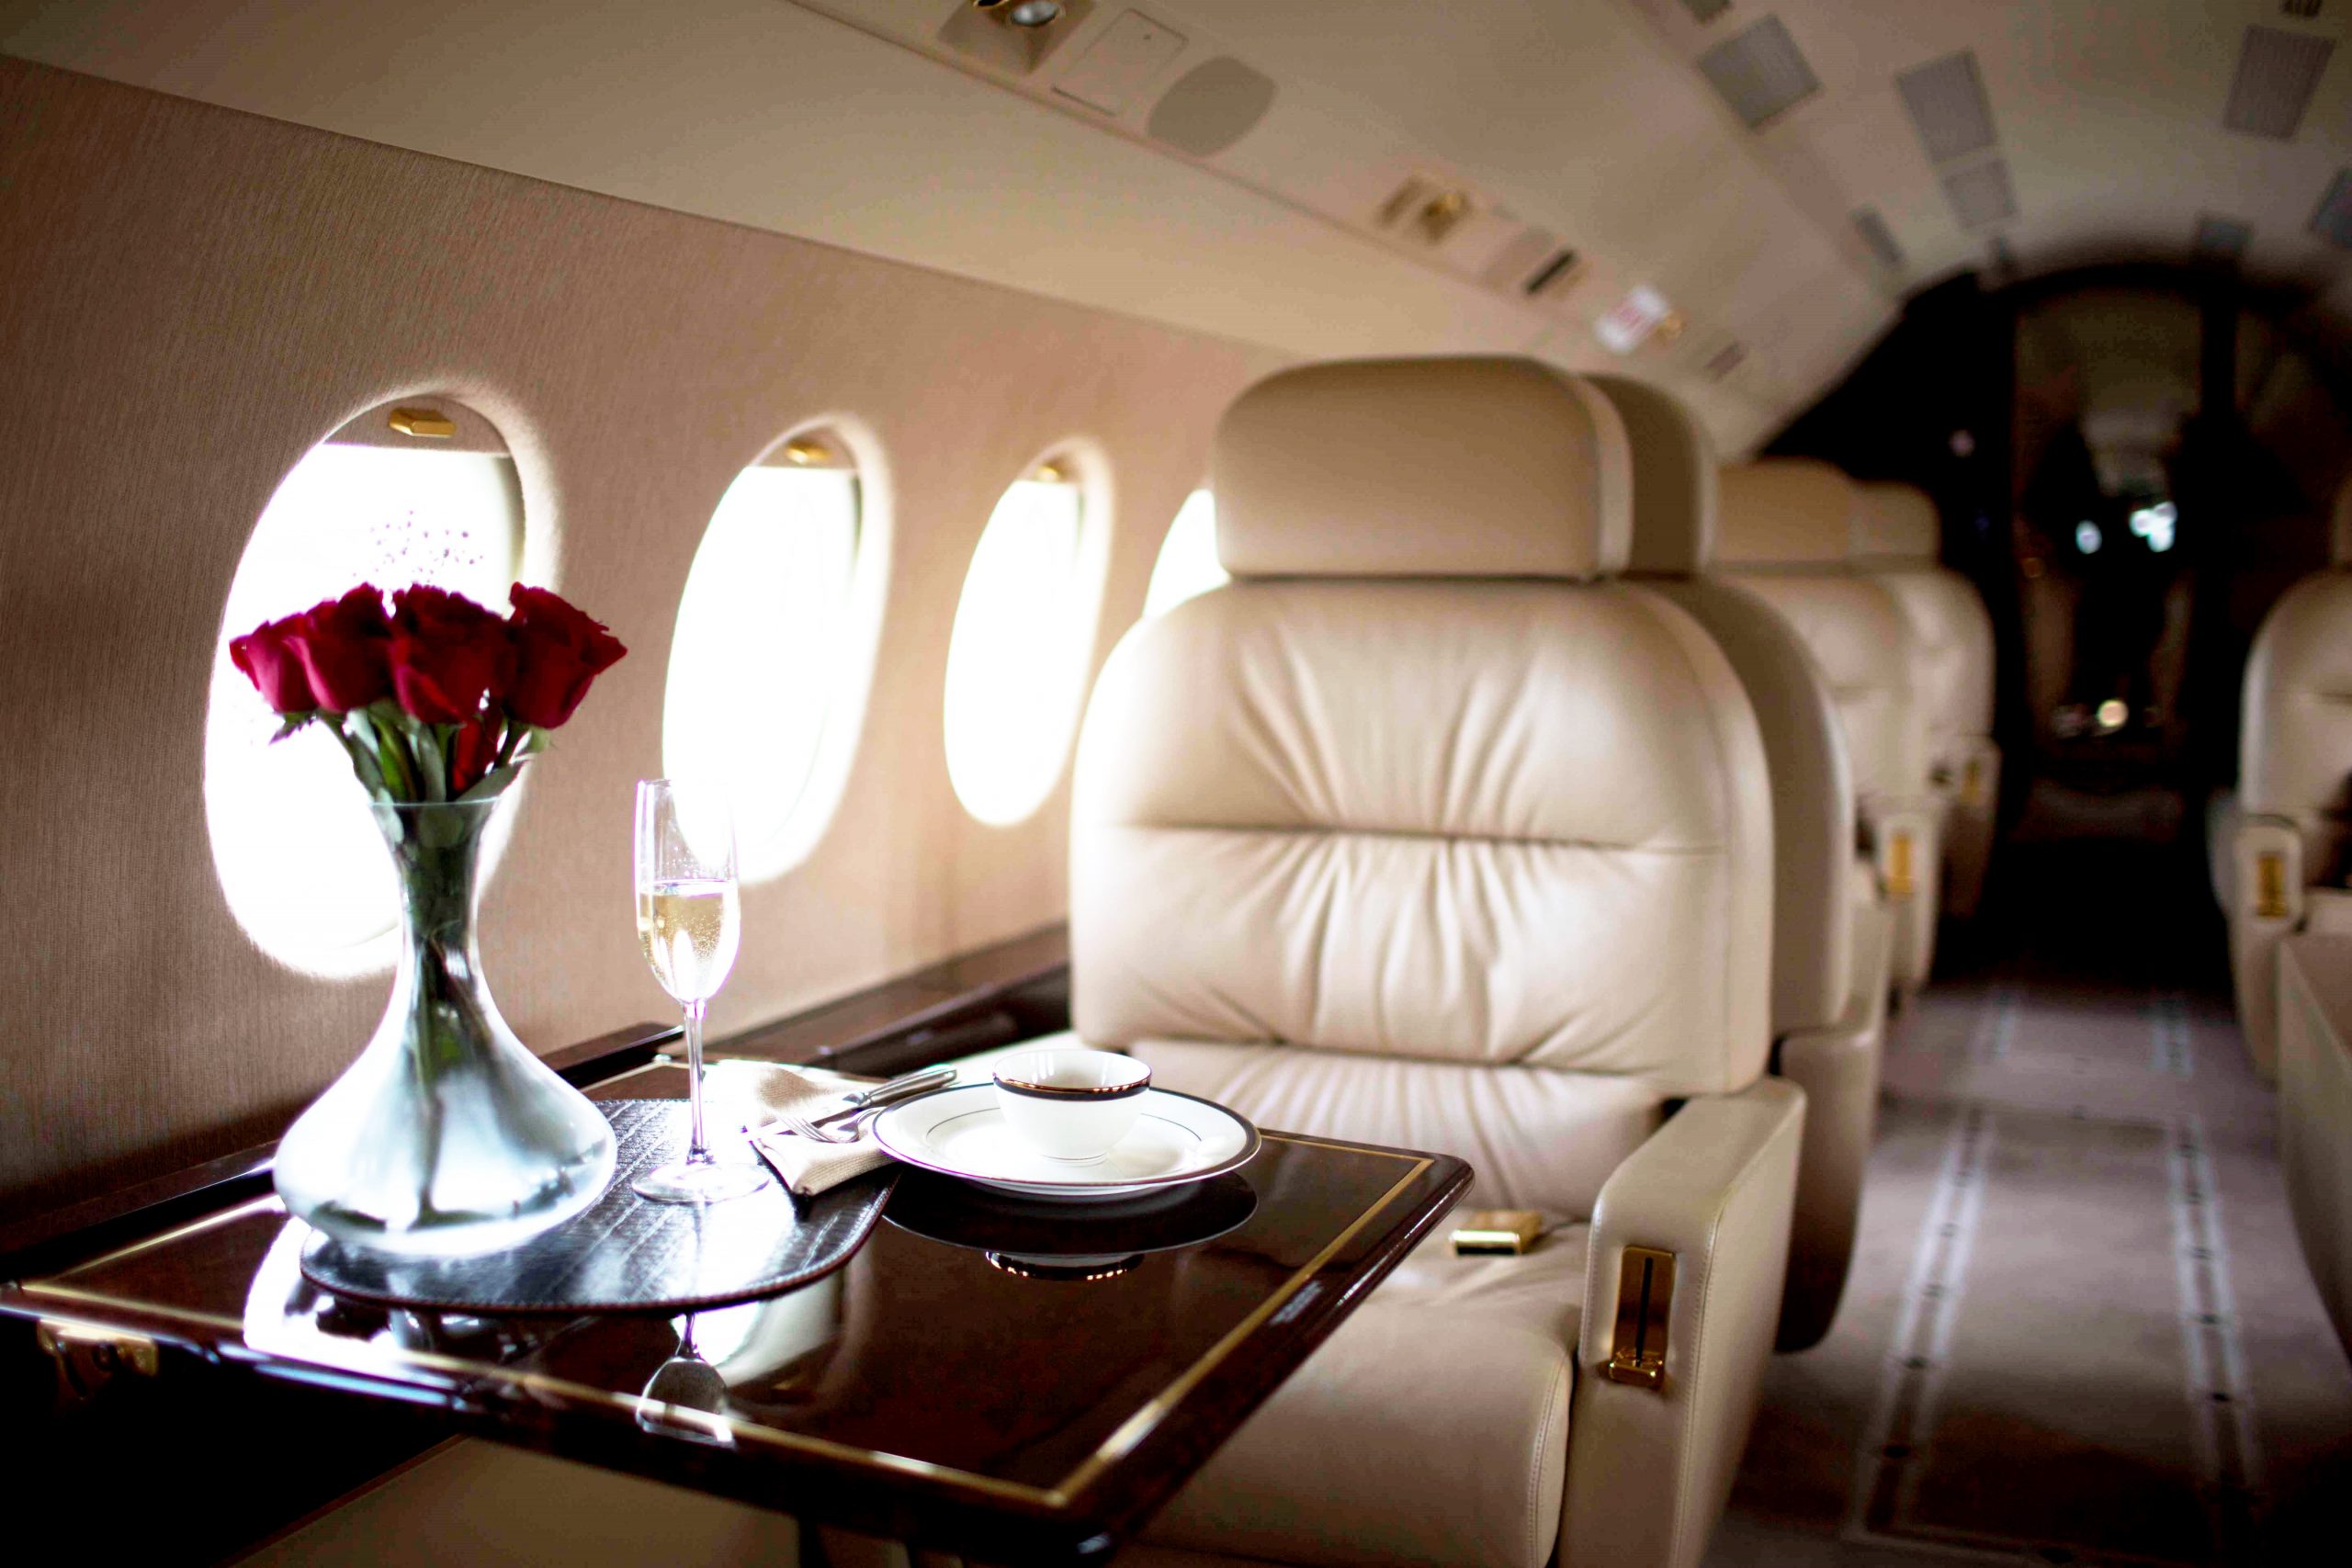 Private Jet Safety and Catering